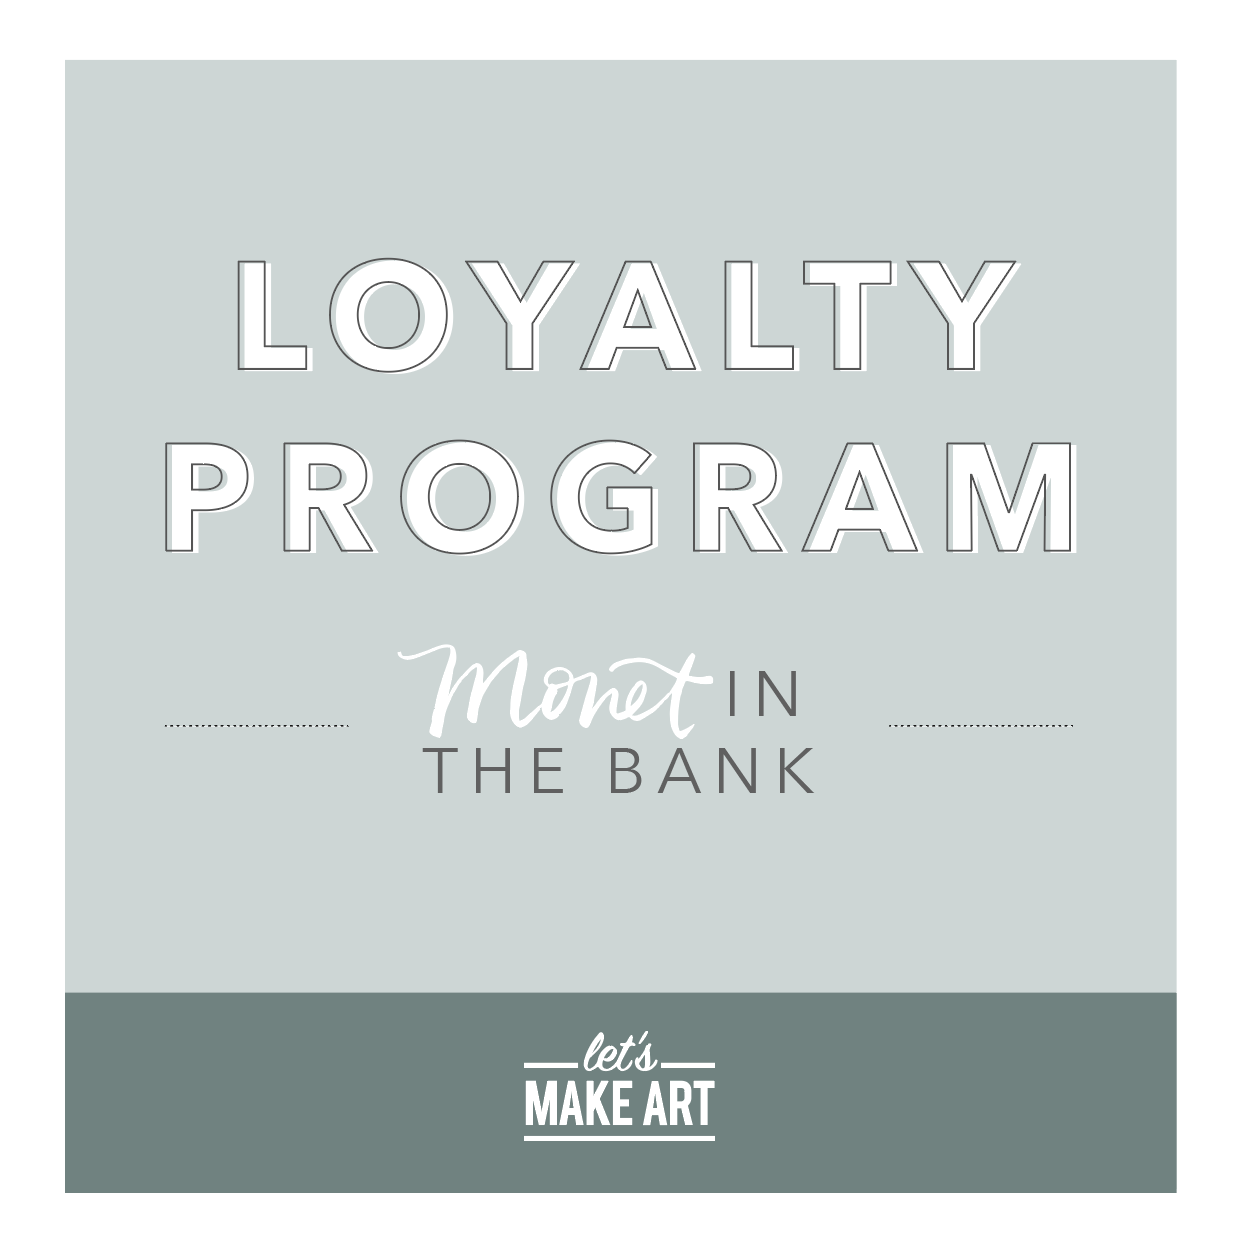 Introducing the Let's Make Art Loyalty Program